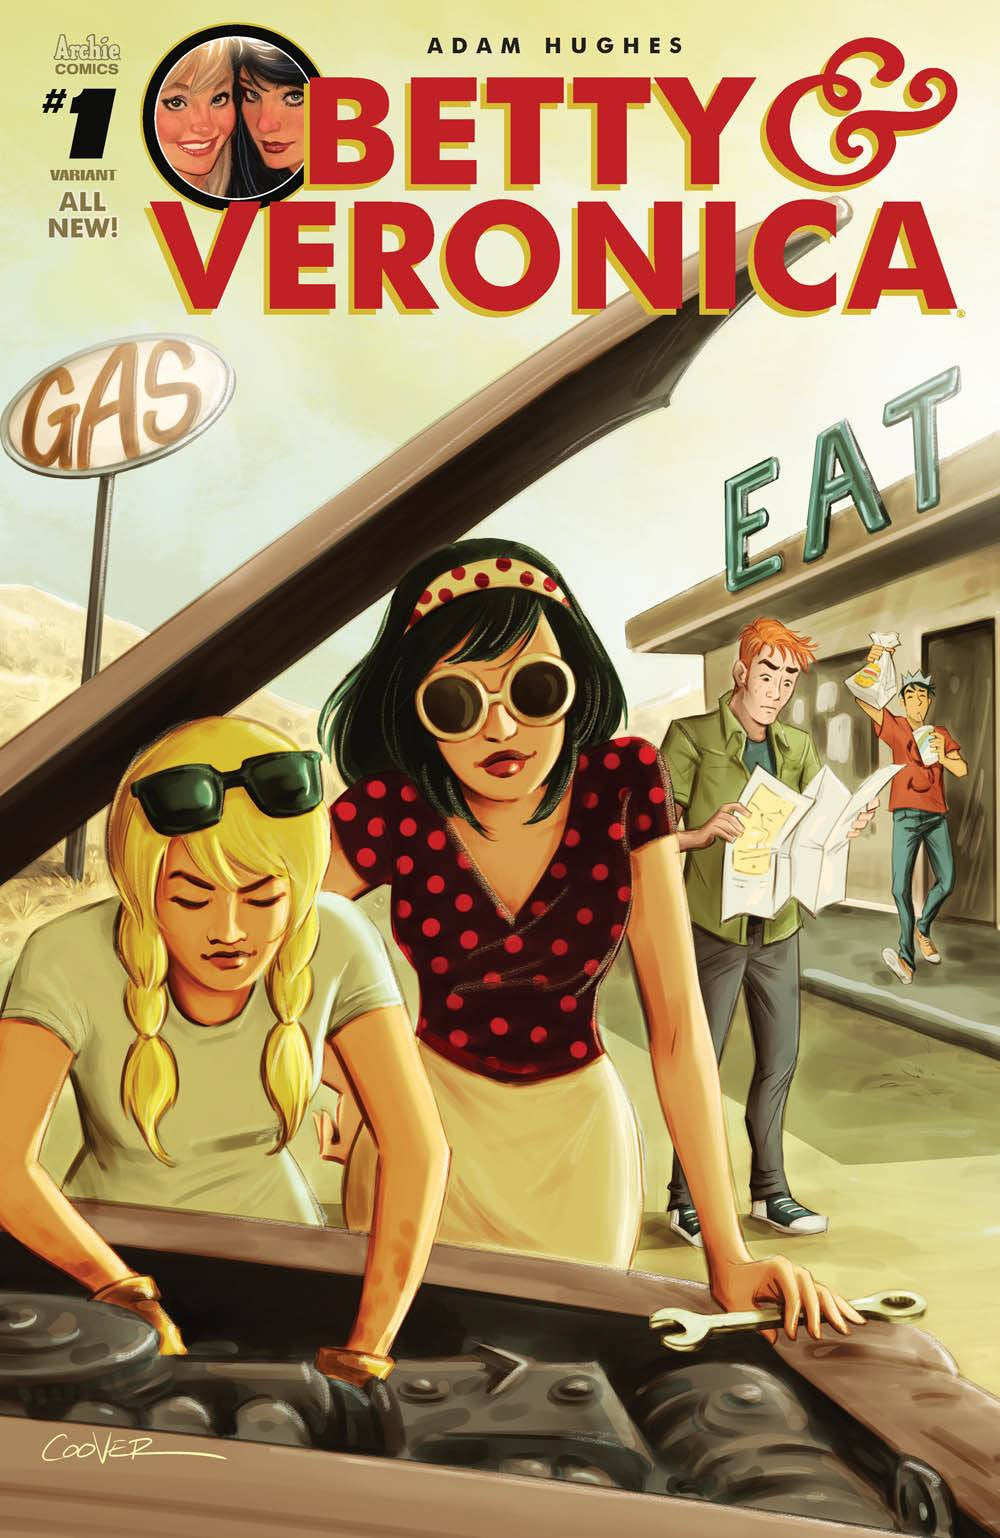 BETTY & VERONICA #1 CVR F VARCOLLEEN COOVER COVER